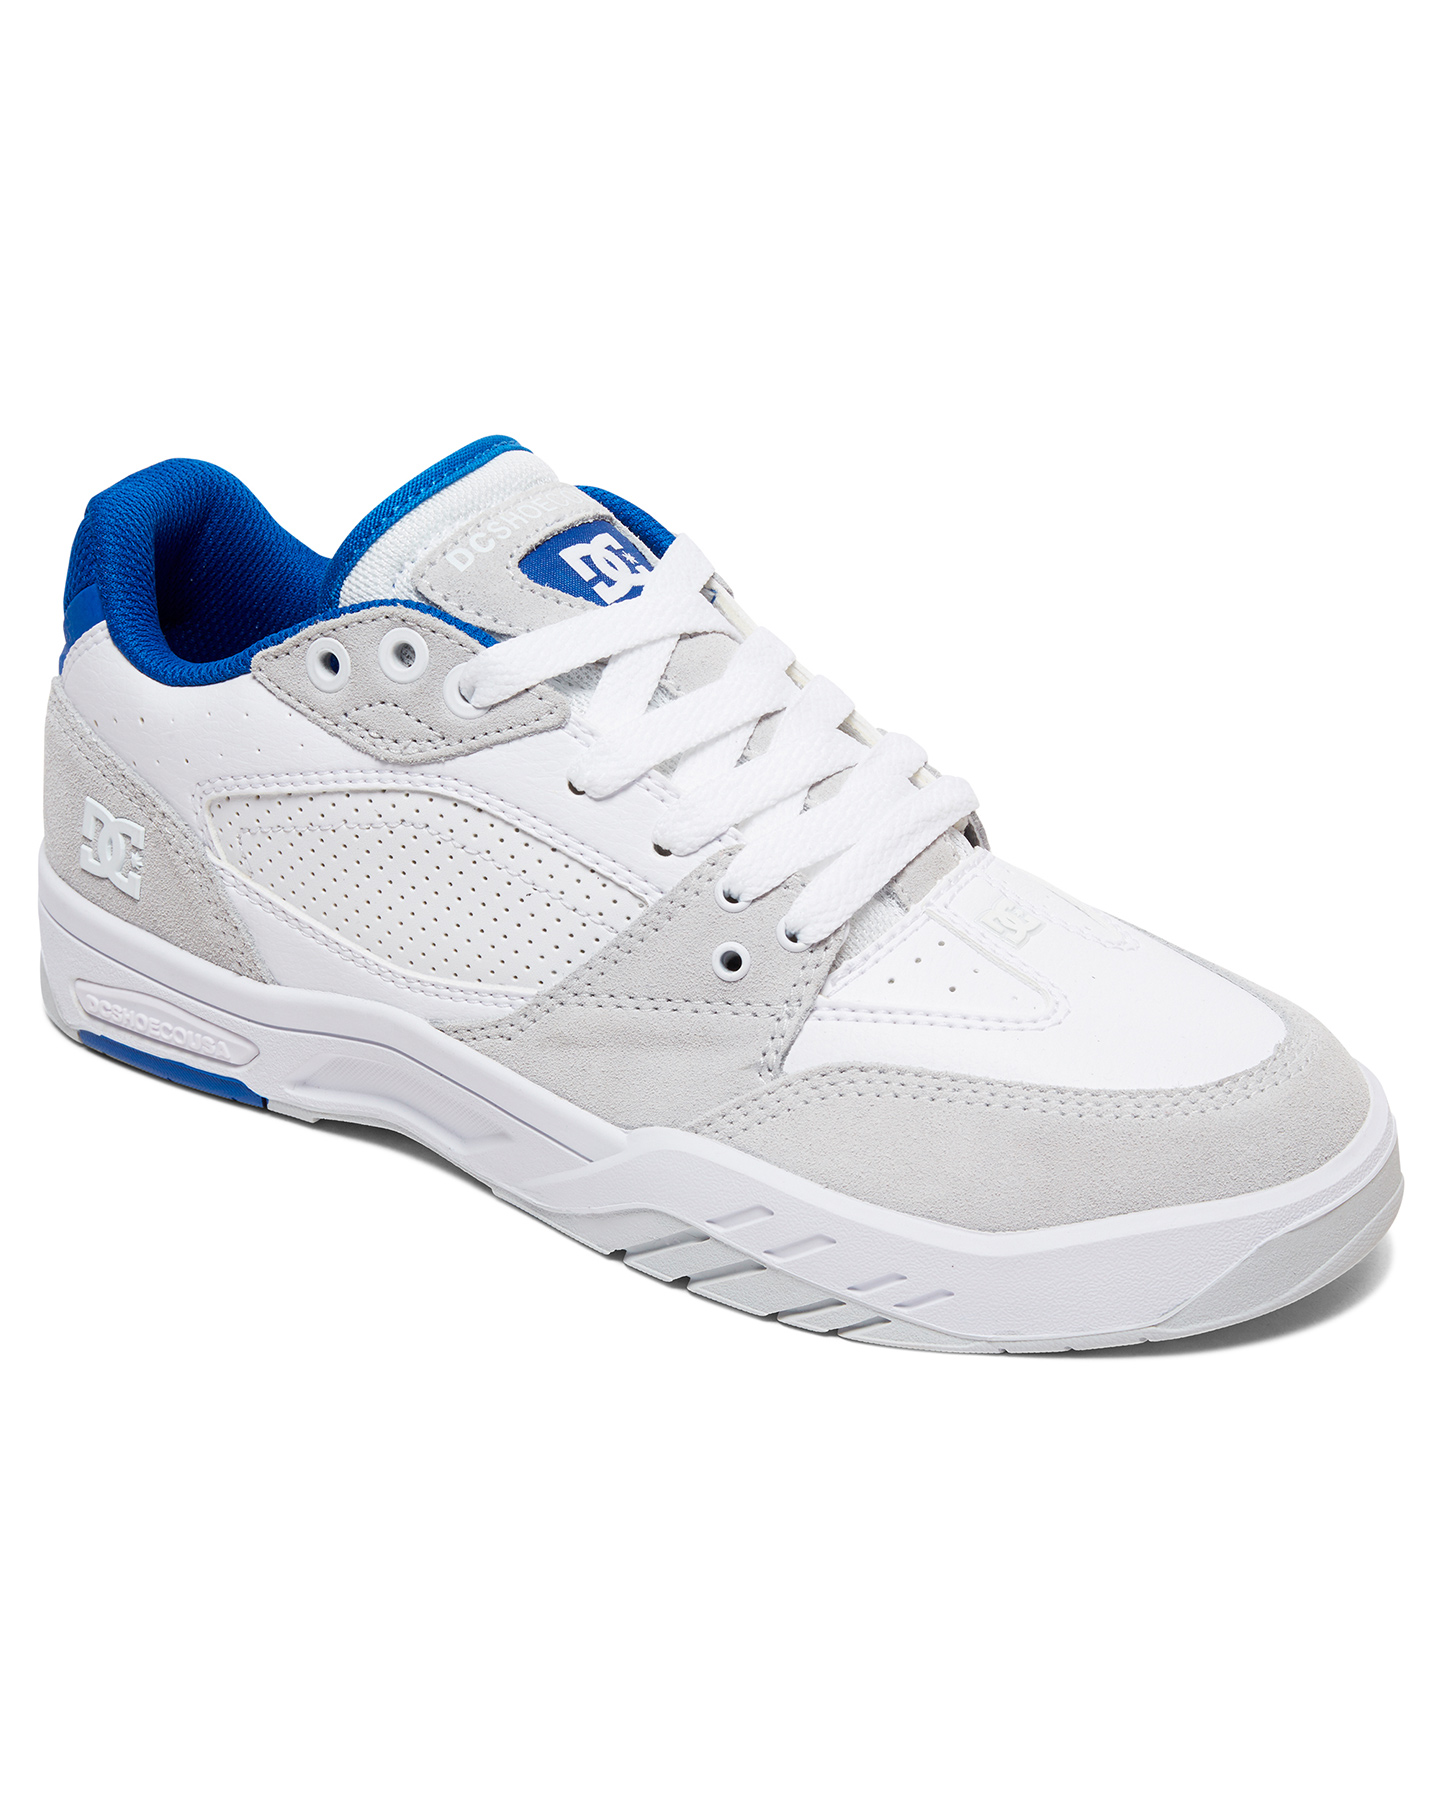 Dc Shoes Mens Maswell Shoe - White/Grey/Blue | SurfStitch